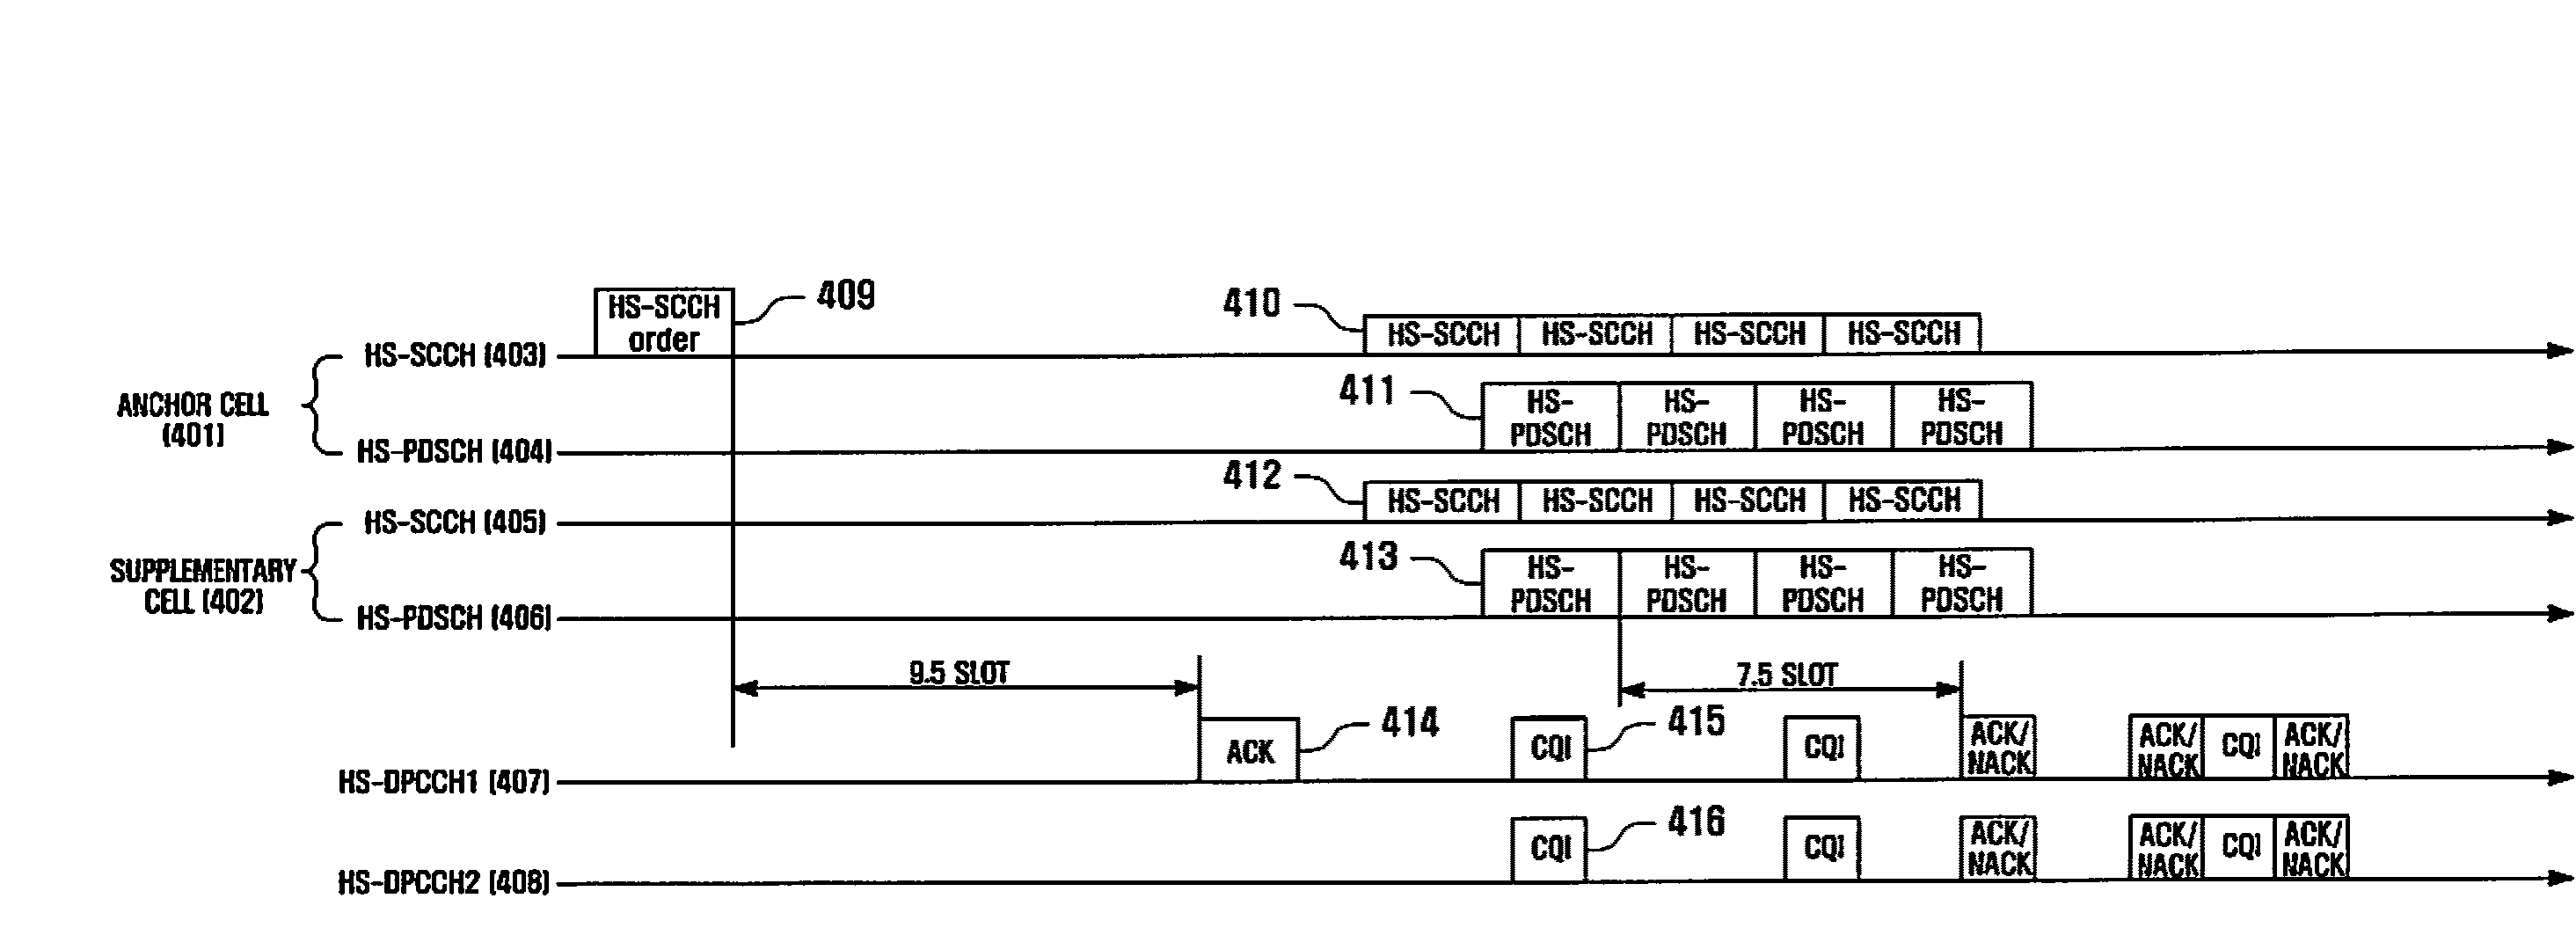 Method and apparatus for dynamically activating and deactivating a supplementary cell for a wcdma system